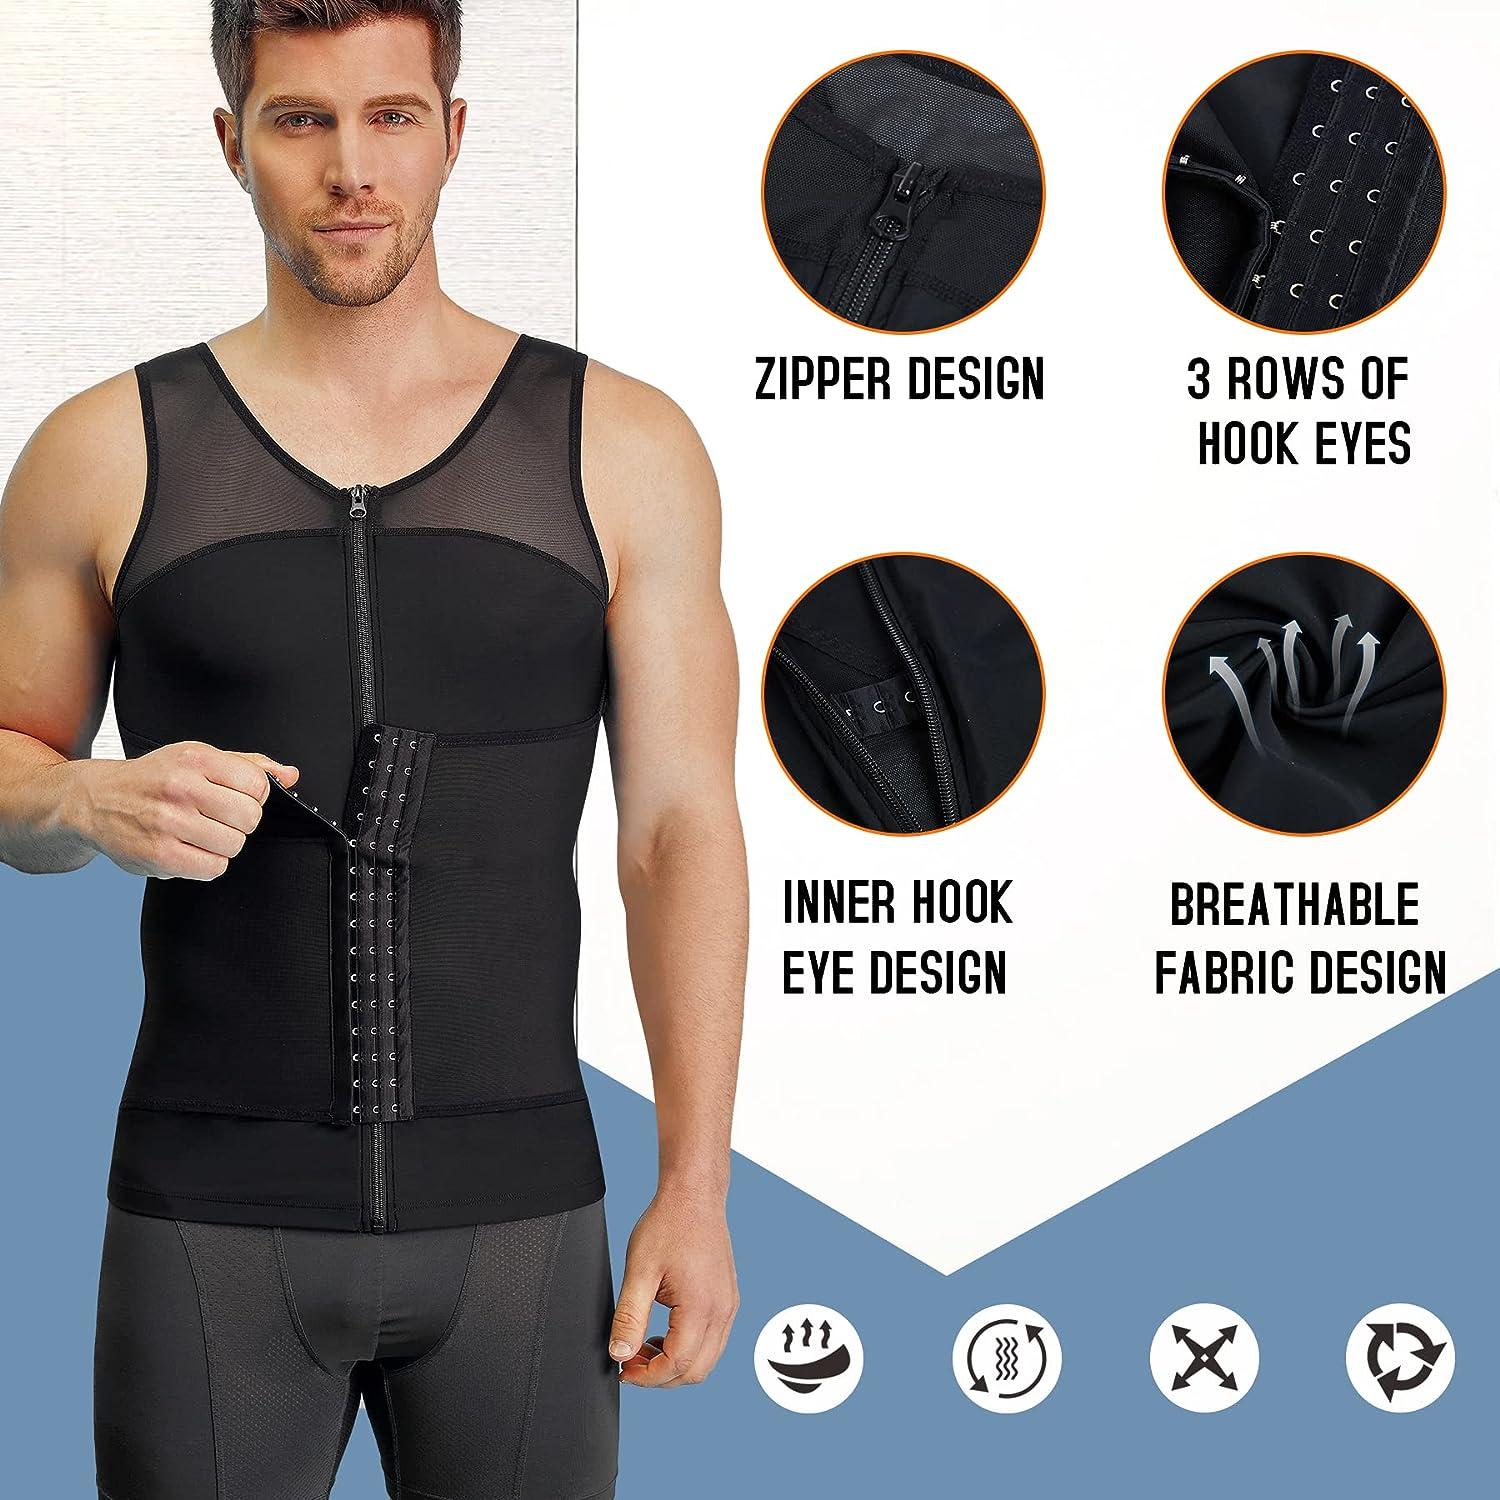  TAILONG Mens Shapewear Tummy Control Full Body Shaper  Compression Slimming Bodysuit Sleeveless Undershirts Fajas Para Hombres :  Clothing, Shoes & Jewelry